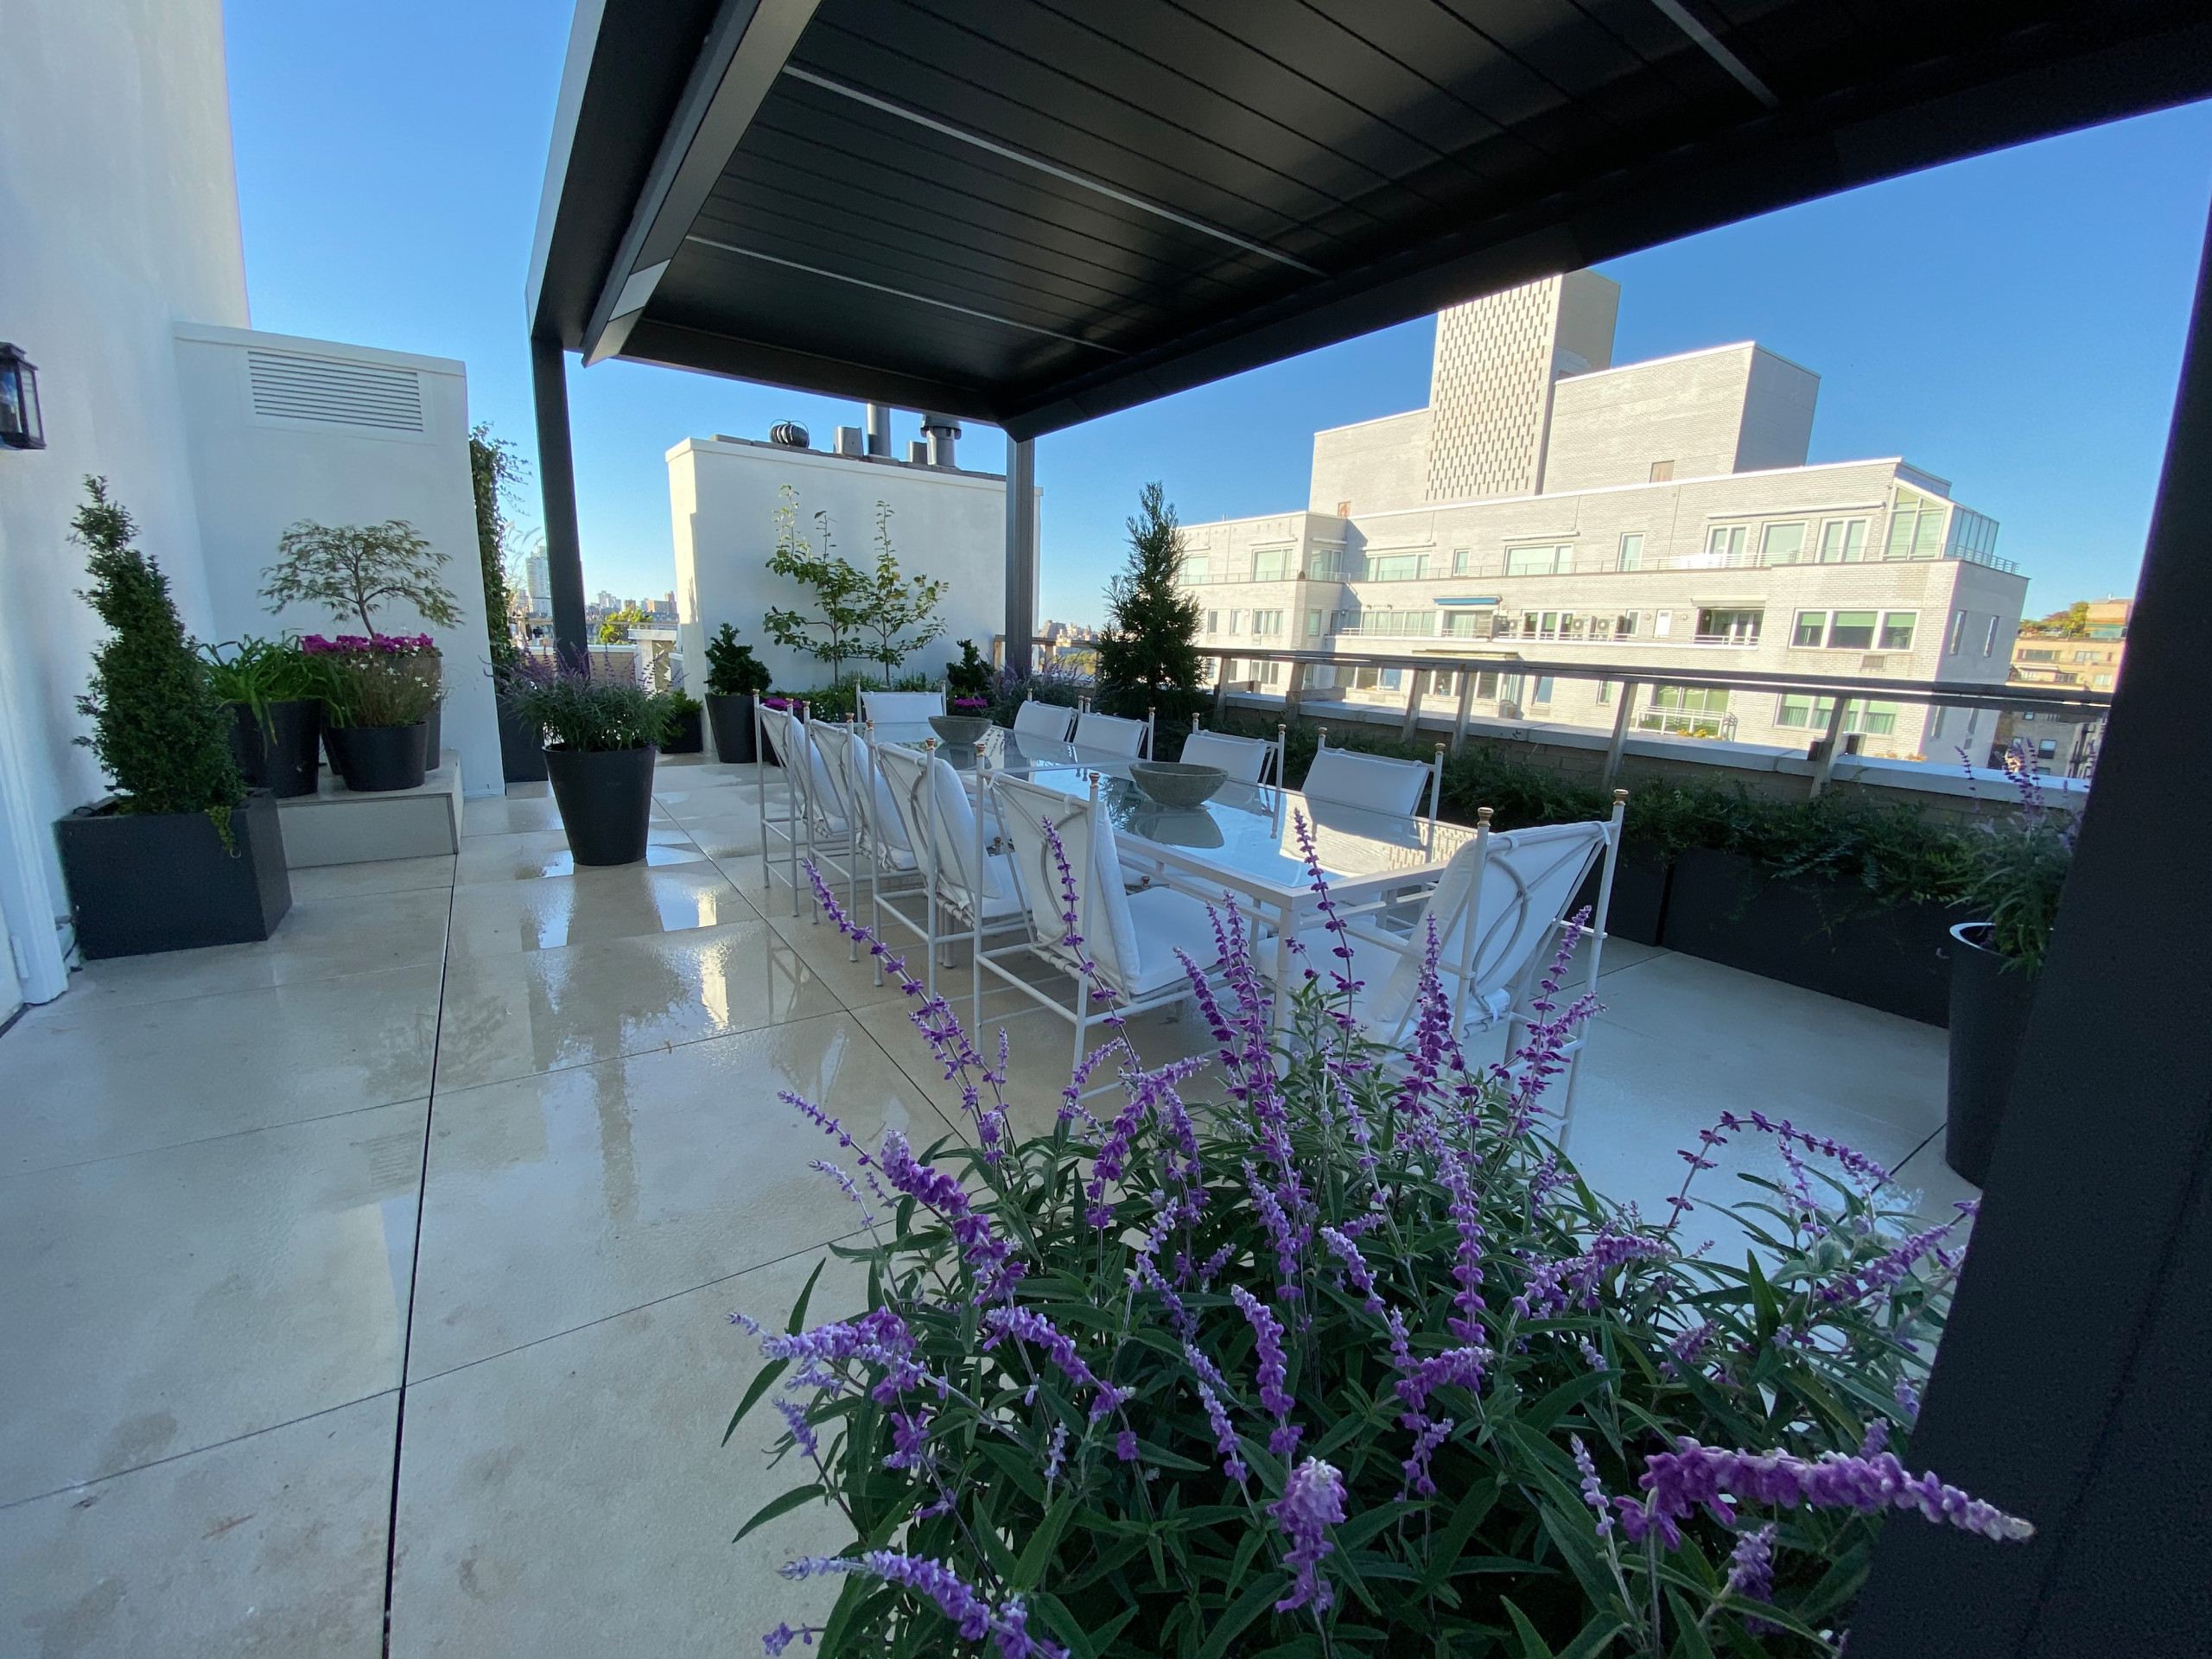 Prewar classic penthouse terrace, with a modern design intended to refresh the outdoor living space and make it more functional for the present day while providing an attractive aesthetic.